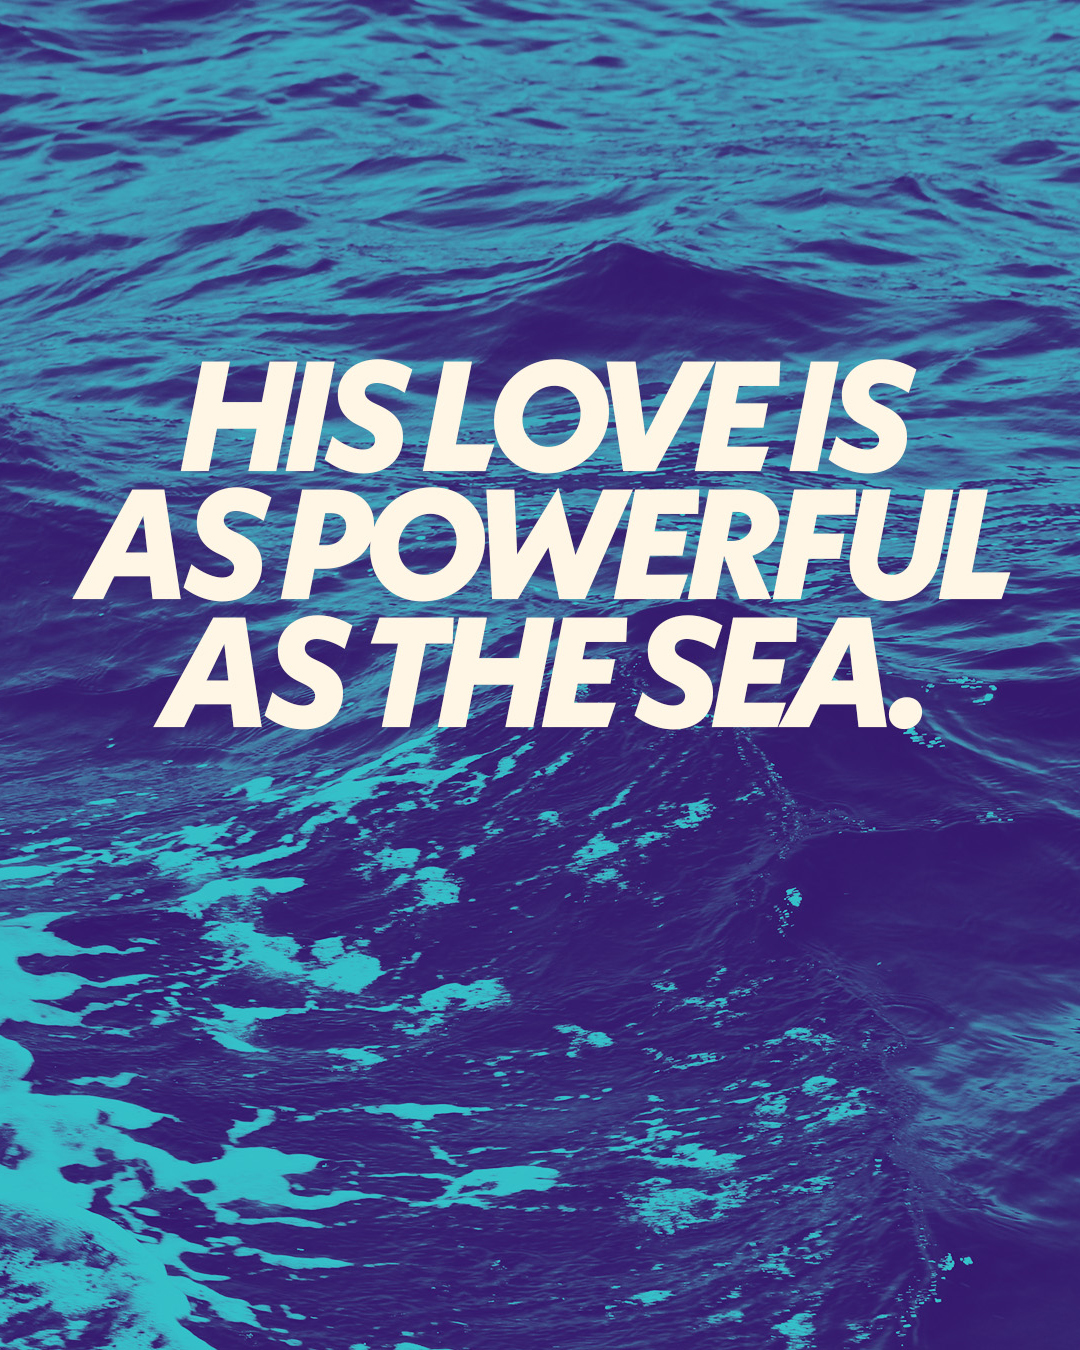 His love is as powerful as the sea.